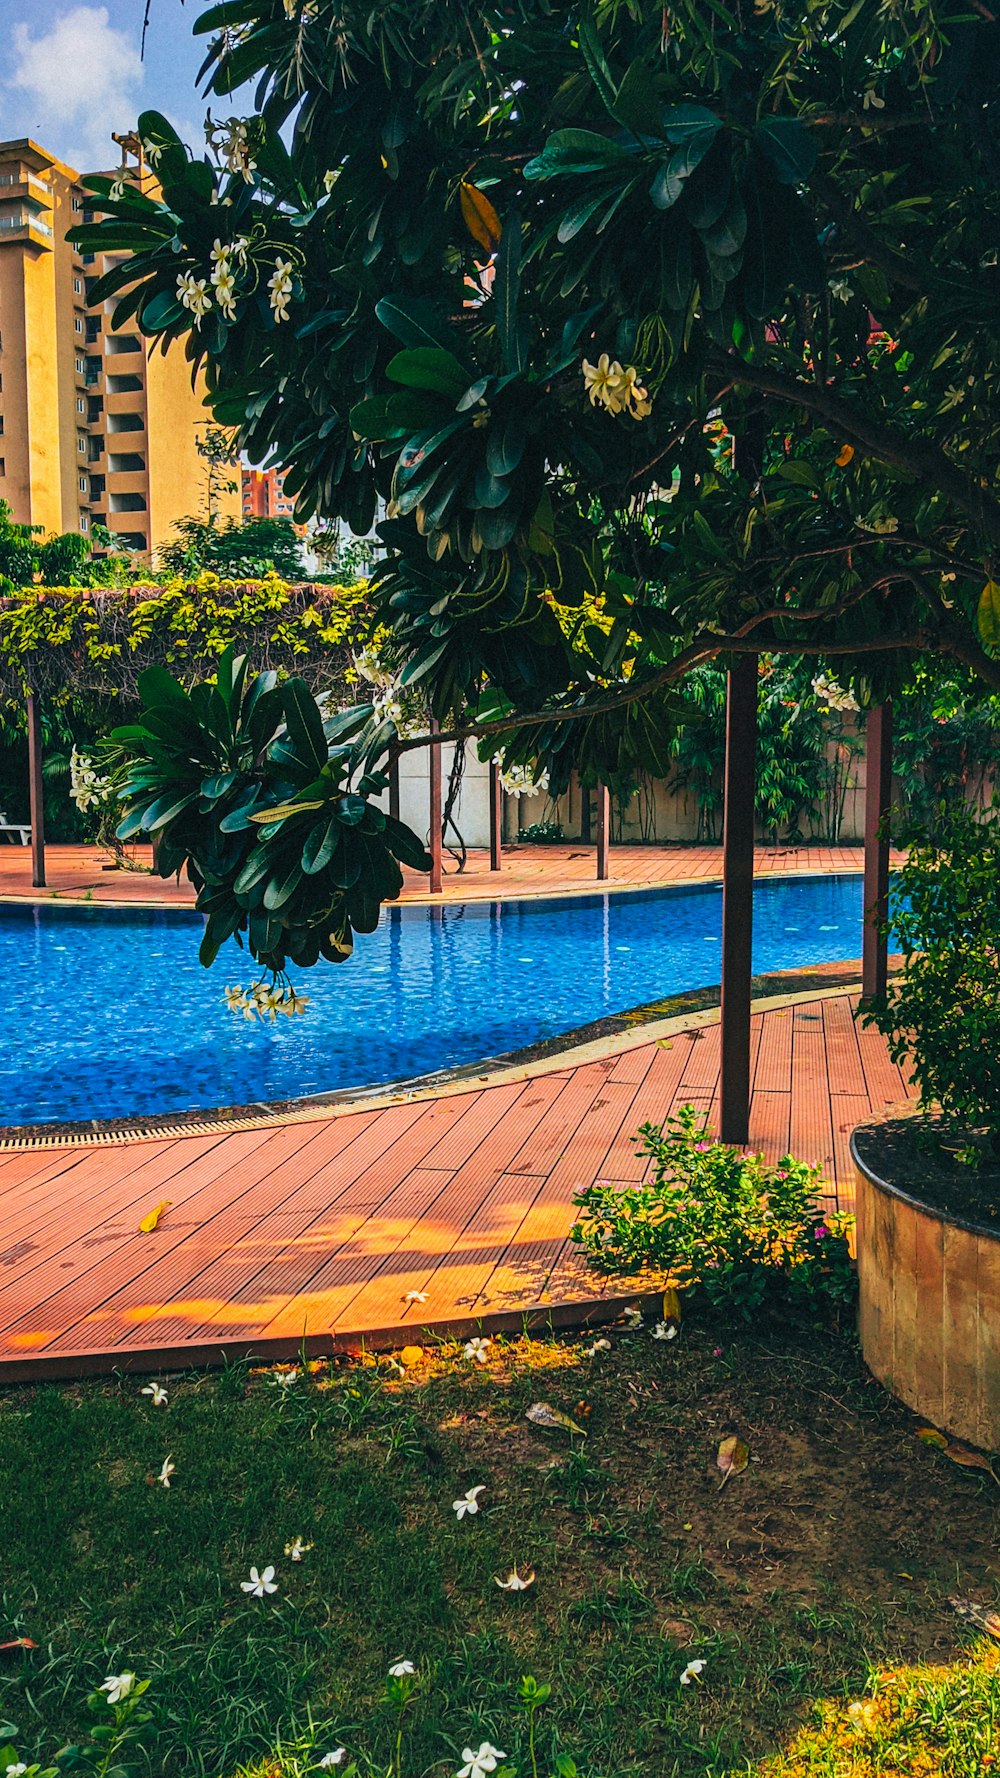 a pool with a tree and a building in the background